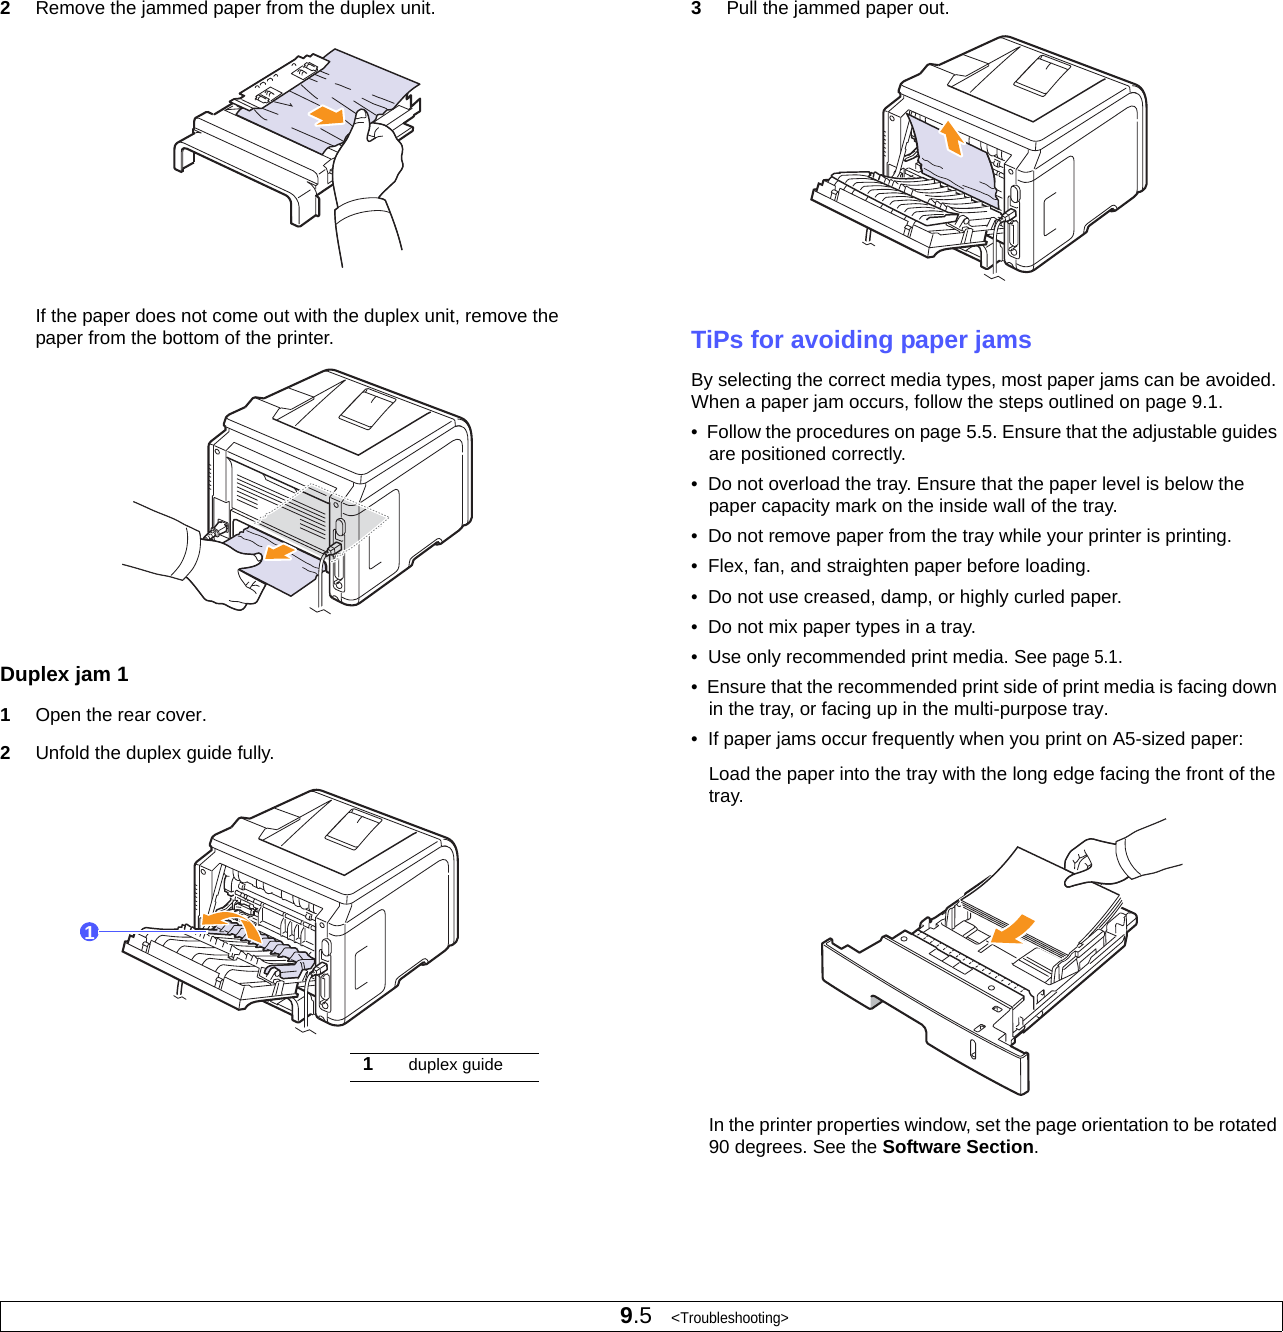 9.5   &lt;Troubleshooting&gt;2Remove the jammed paper from the duplex unit.If the paper does not come out with the duplex unit, remove the paper from the bottom of the printer.Duplex jam 11Open the rear cover.2Unfold the duplex guide fully.11duplex guide3Pull the jammed paper out.TiPs for avoiding paper jamsBy selecting the correct media types, most paper jams can be avoided. When a paper jam occurs, follow the steps outlined on page 9.1. •  Follow the procedures on page 5.5. Ensure that the adjustable guides are positioned correctly.•  Do not overload the tray. Ensure that the paper level is below the paper capacity mark on the inside wall of the tray.•  Do not remove paper from the tray while your printer is printing.•  Flex, fan, and straighten paper before loading. •  Do not use creased, damp, or highly curled paper.•  Do not mix paper types in a tray.•  Use only recommended print media. See page 5.1.•  Ensure that the recommended print side of print media is facing down in the tray, or facing up in the multi-purpose tray.•  If paper jams occur frequently when you print on A5-sized paper:Load the paper into the tray with the long edge facing the front of the tray. In the printer properties window, set the page orientation to be rotated 90 degrees. See the Software Section.